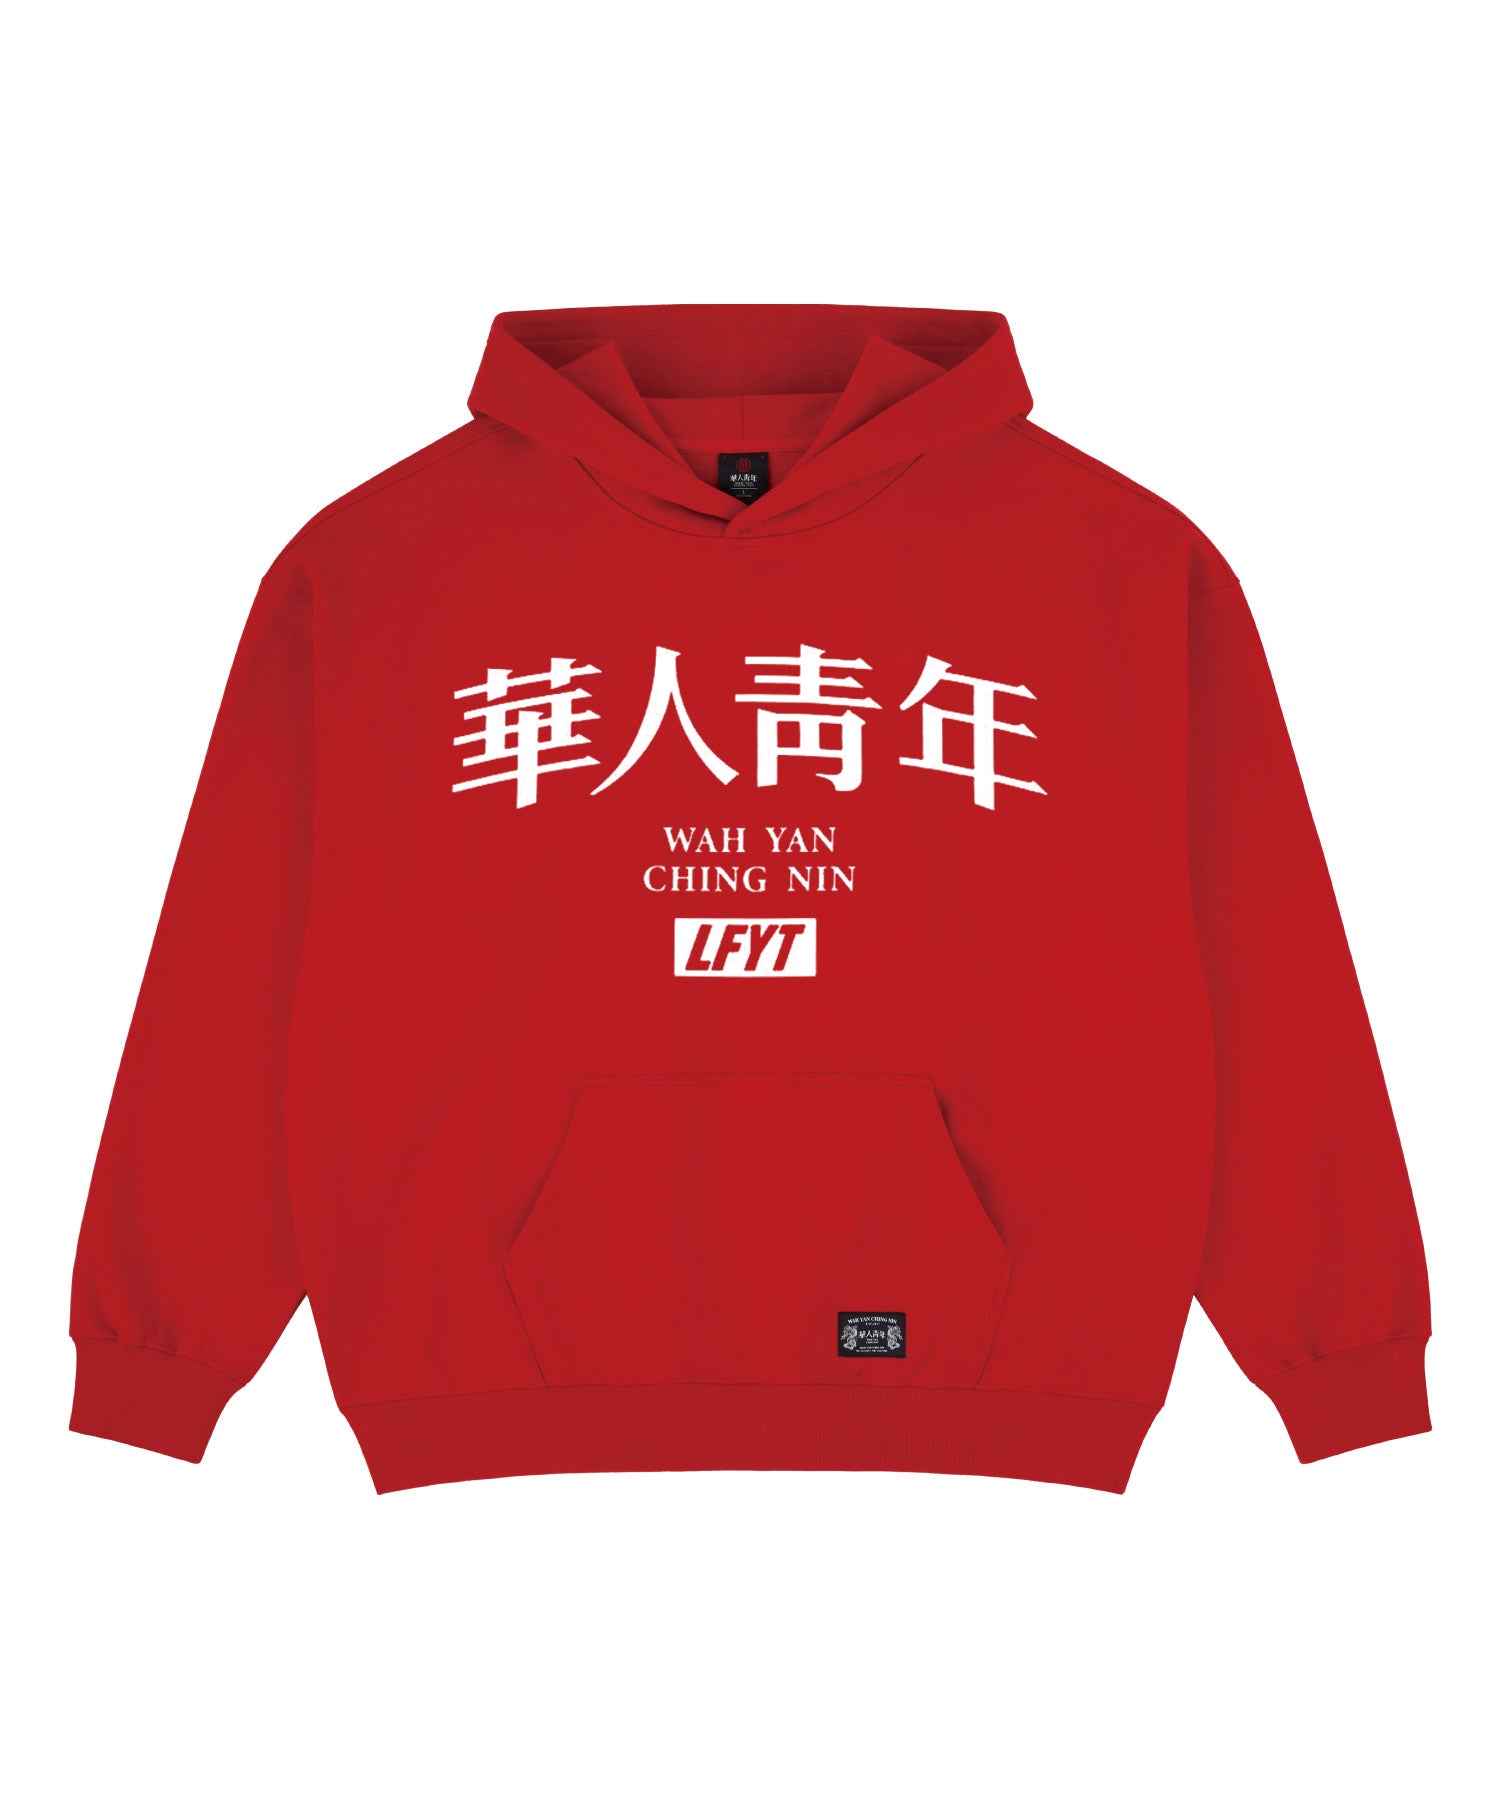 LFYT x 華人青年 HOODIE HR3272310 RED